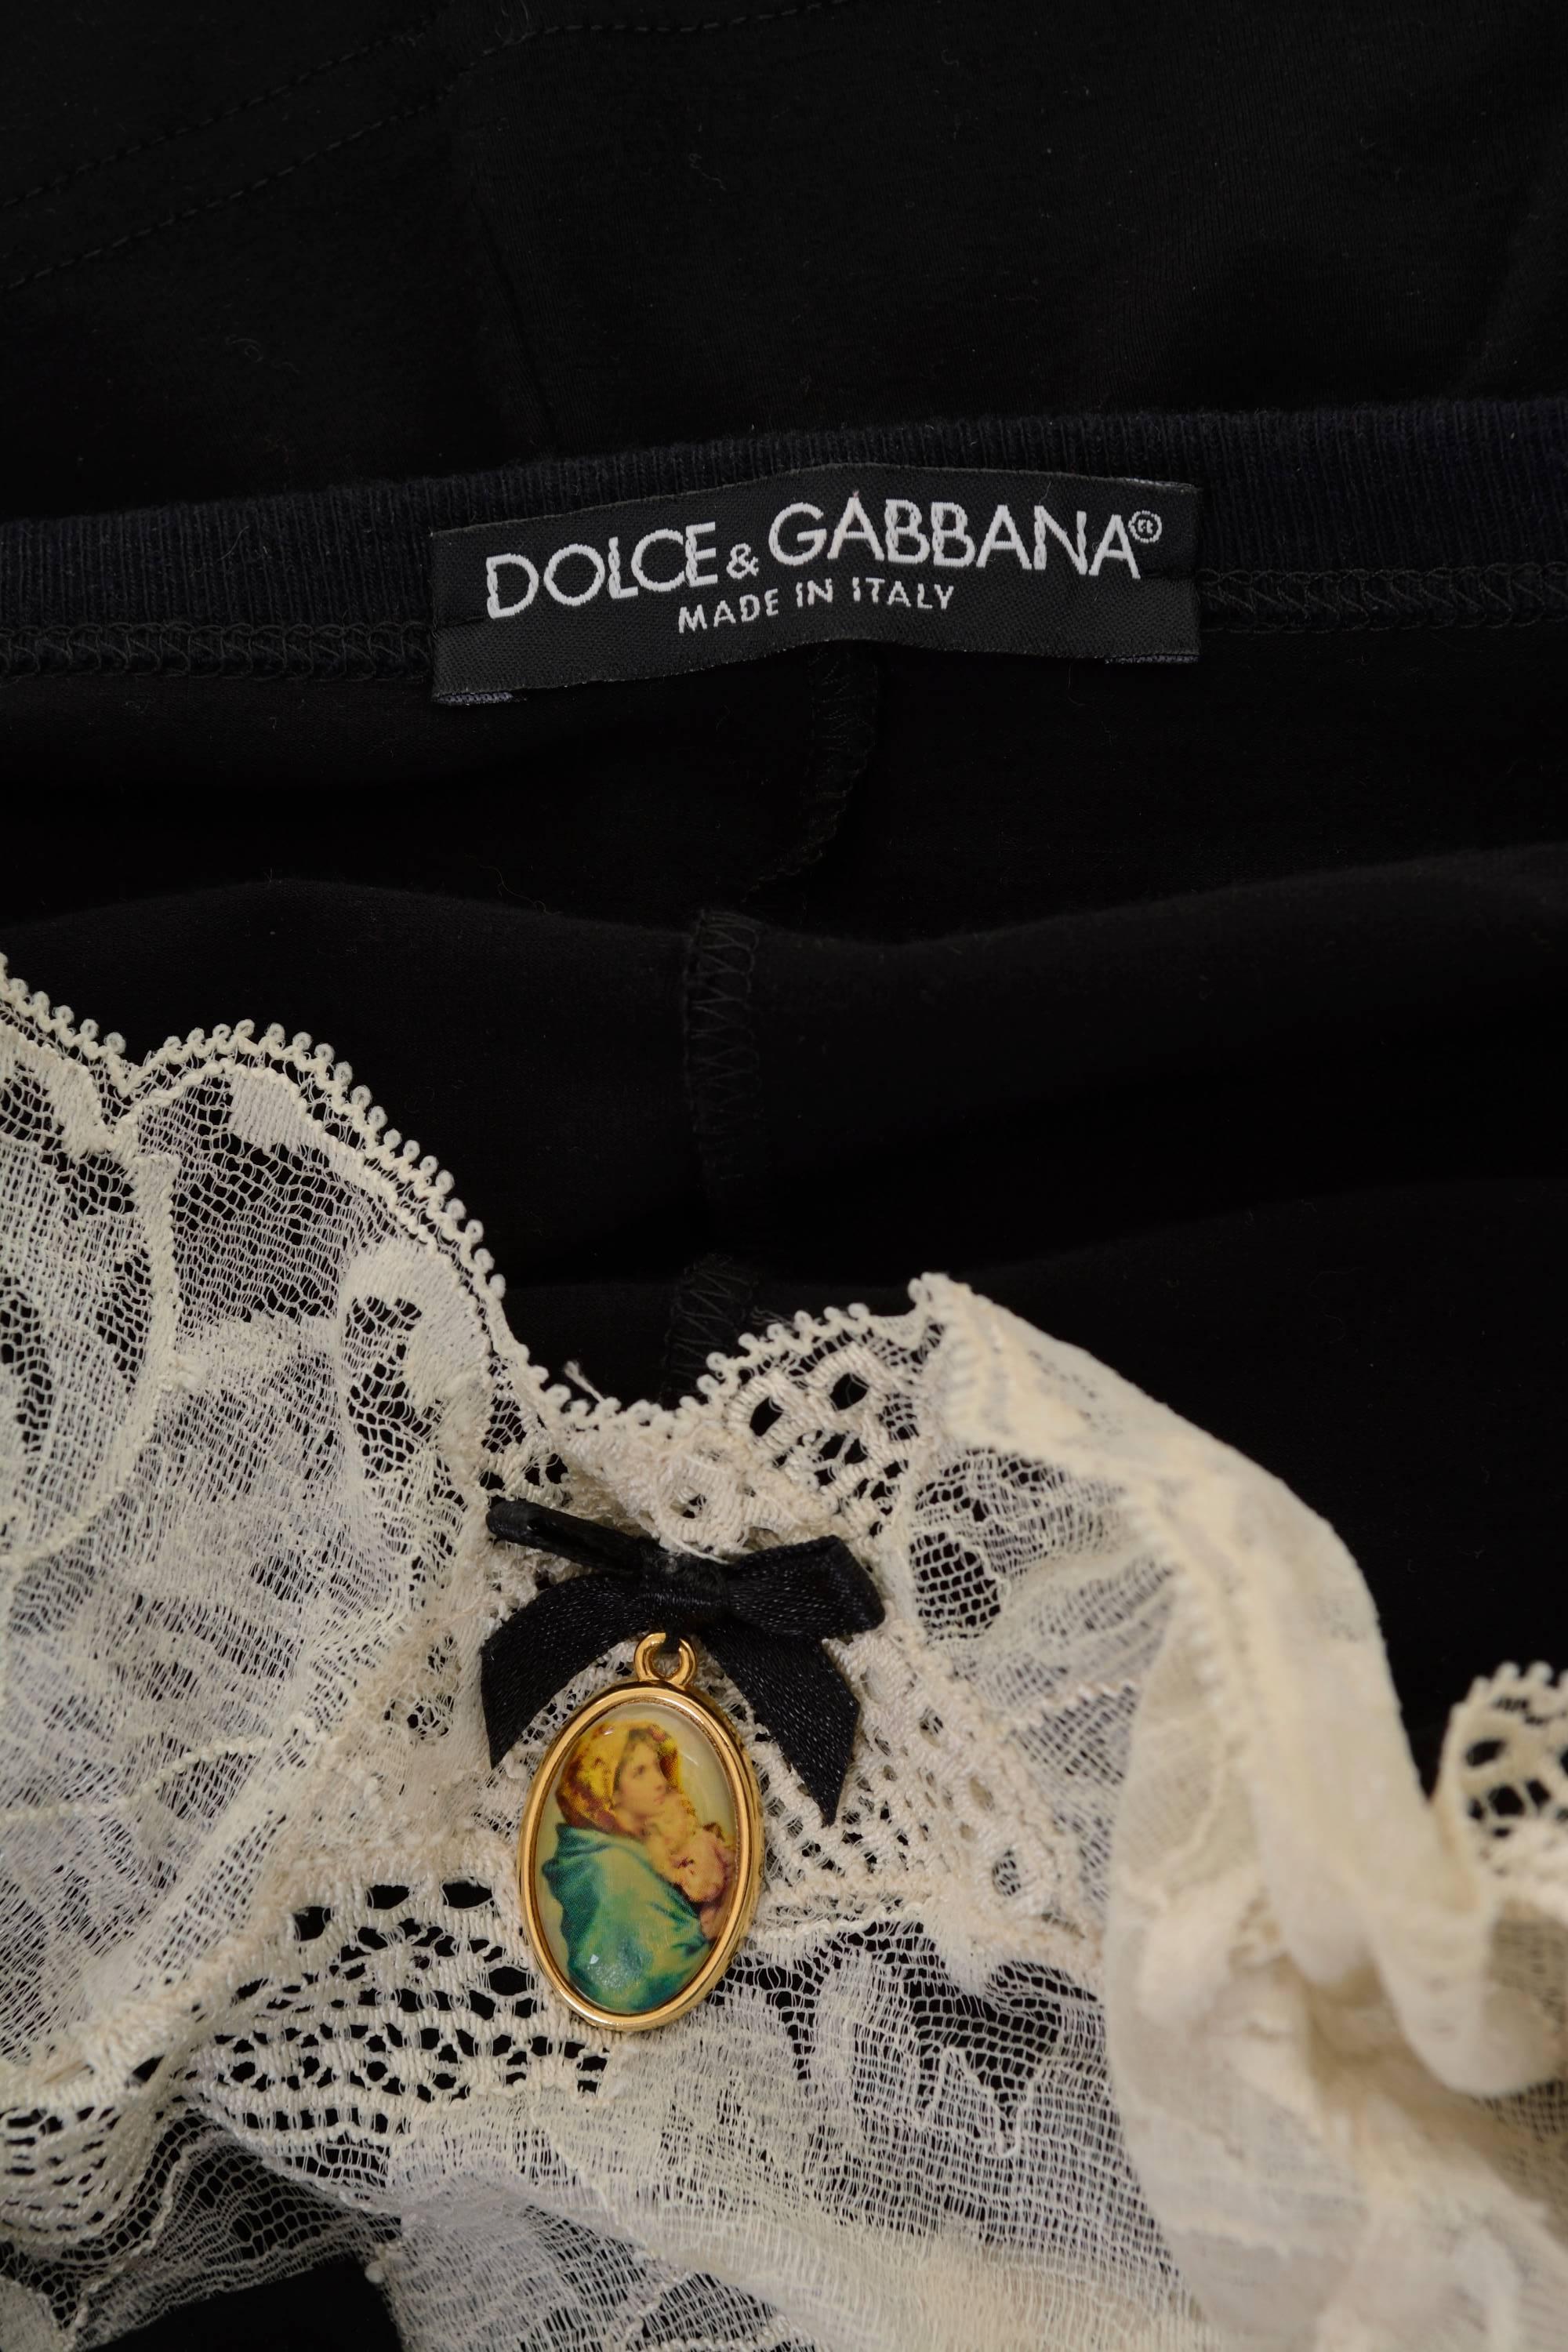 Dolce & Gabbana Black T-shirt Cardigan with Cream Lace Tank Top For Sale 1